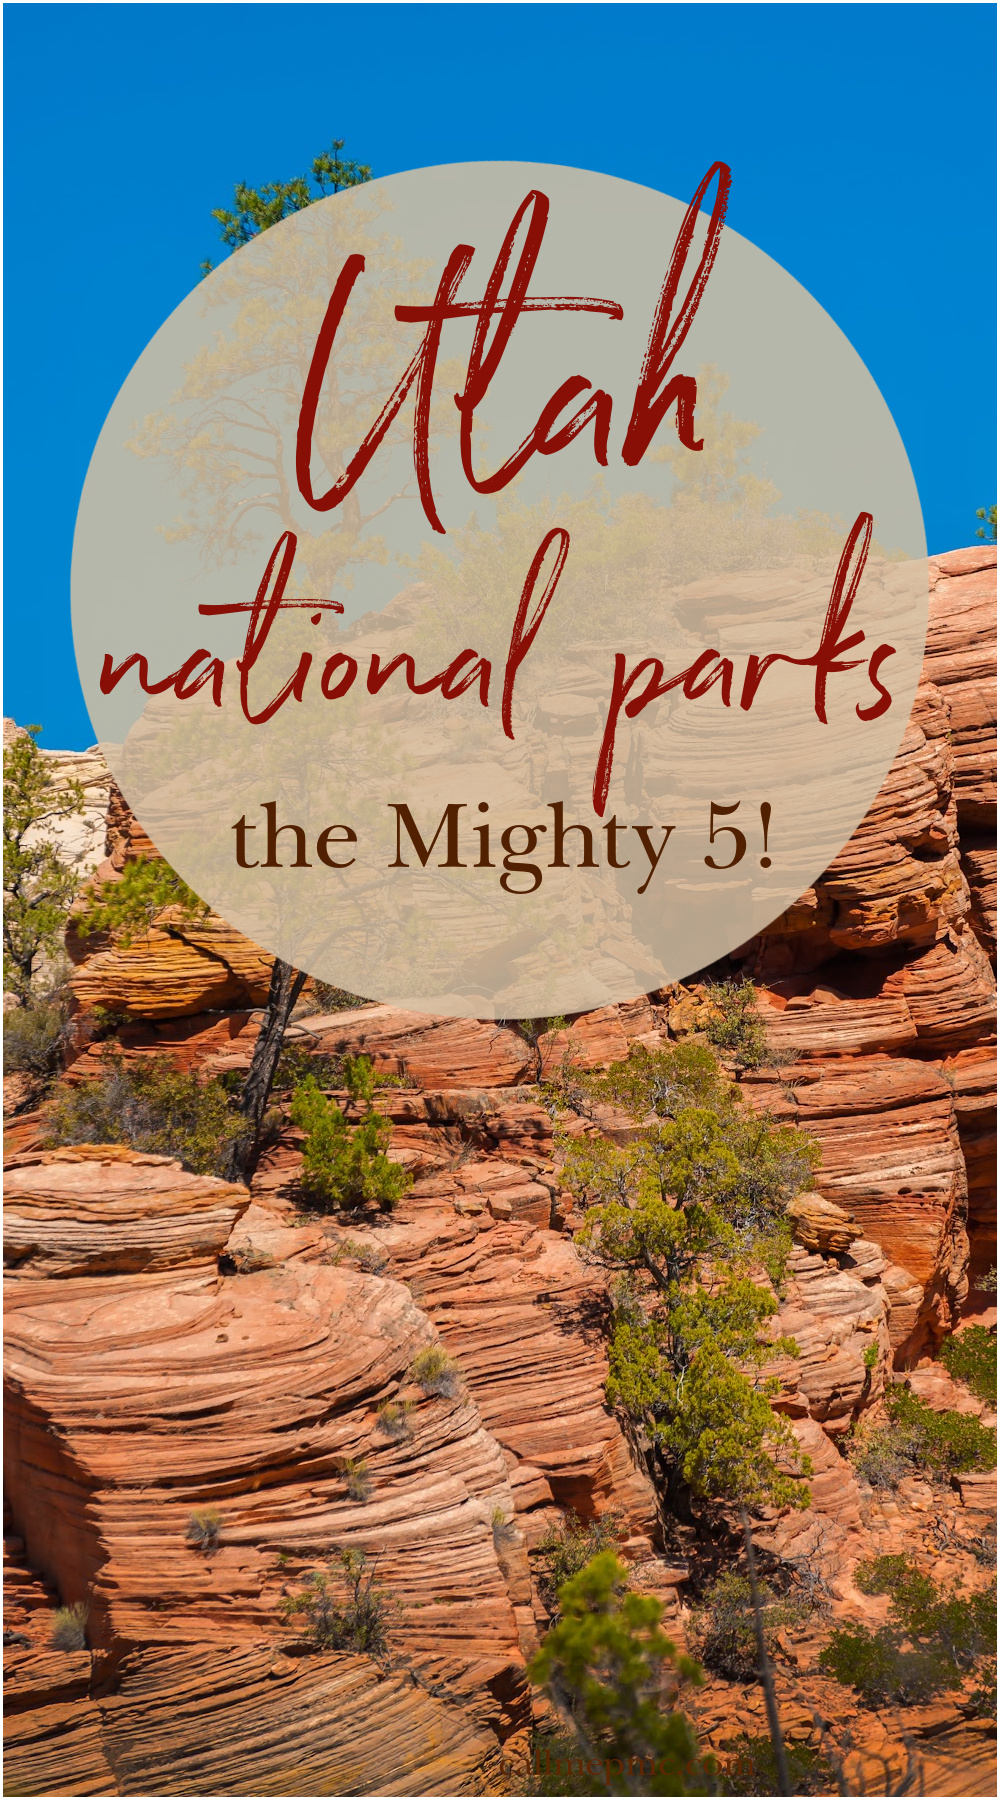 Utah national parks the mighty 5.